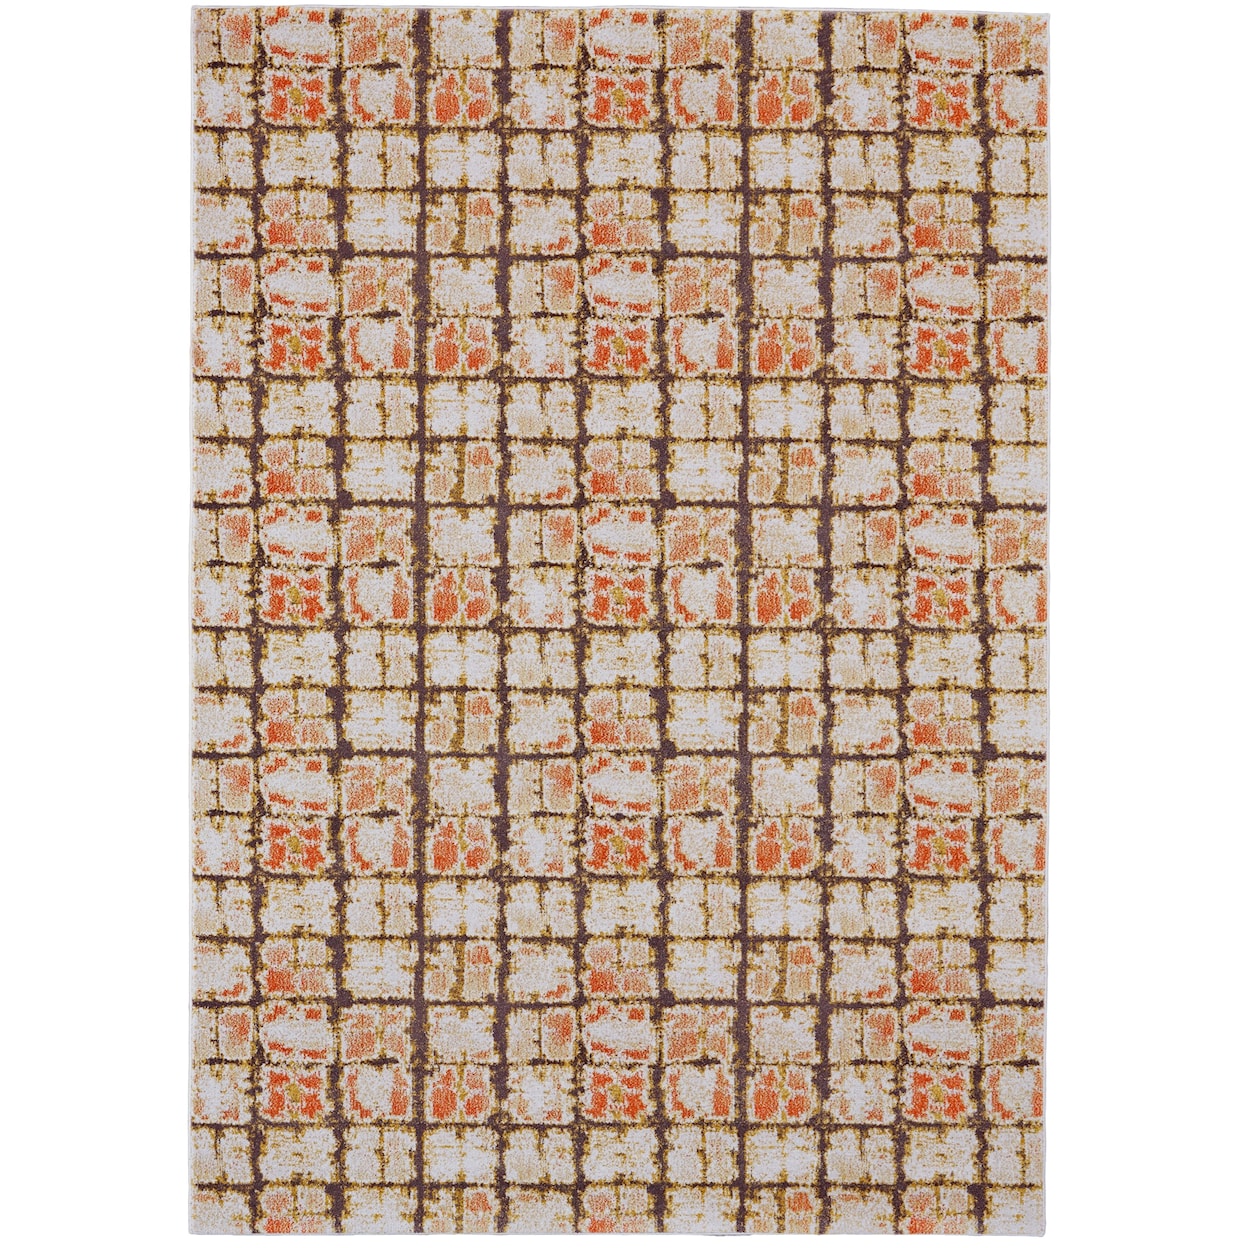 Feizy Rugs Cambrian Sorbet 5' x 8' Area Rug